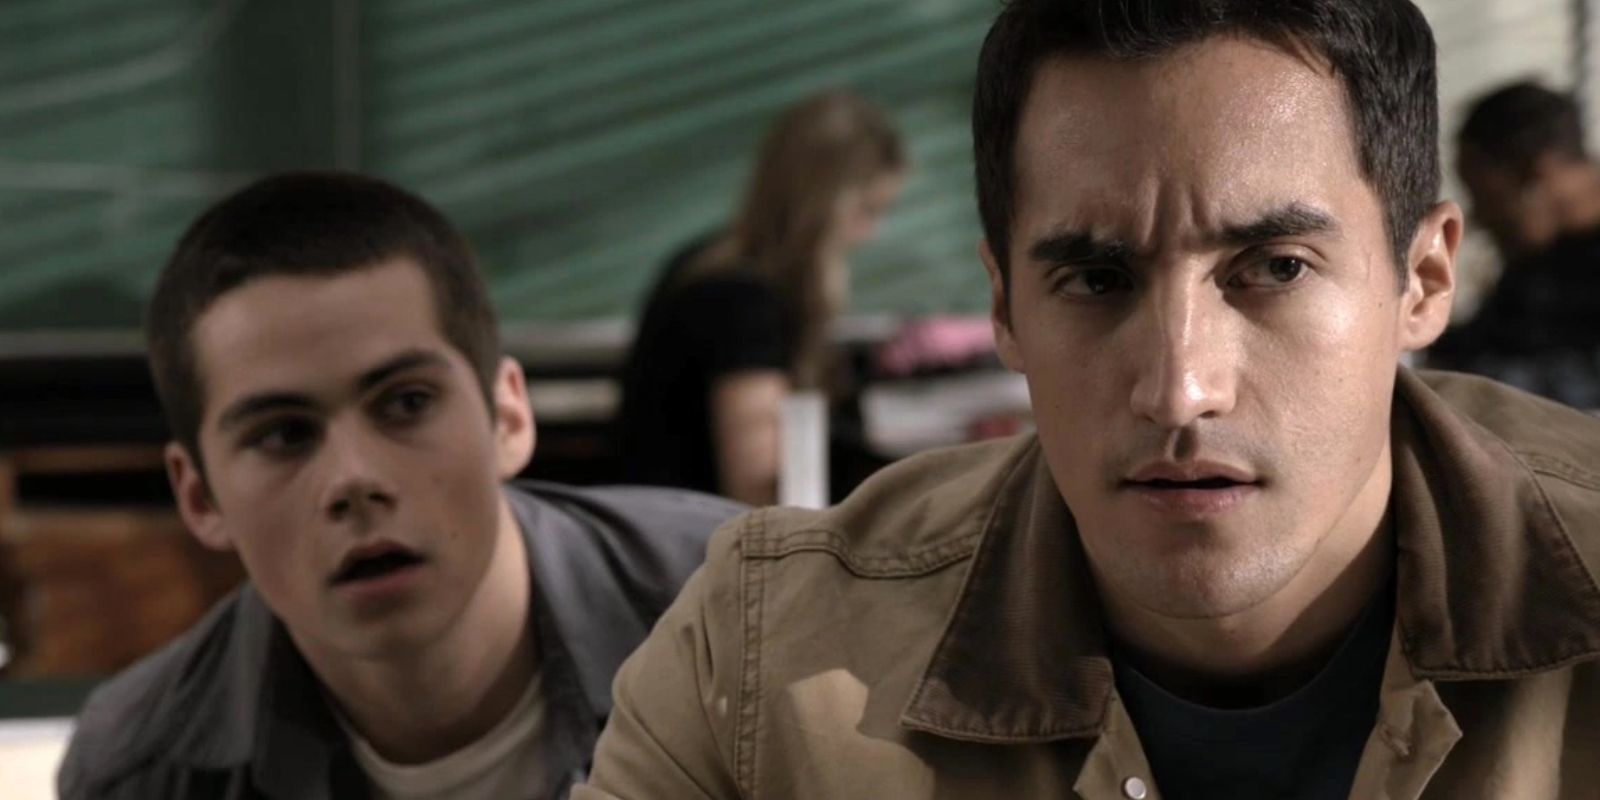 Zodiac Signs Of Teen Wolf Characters According To Their Canon Birthdays